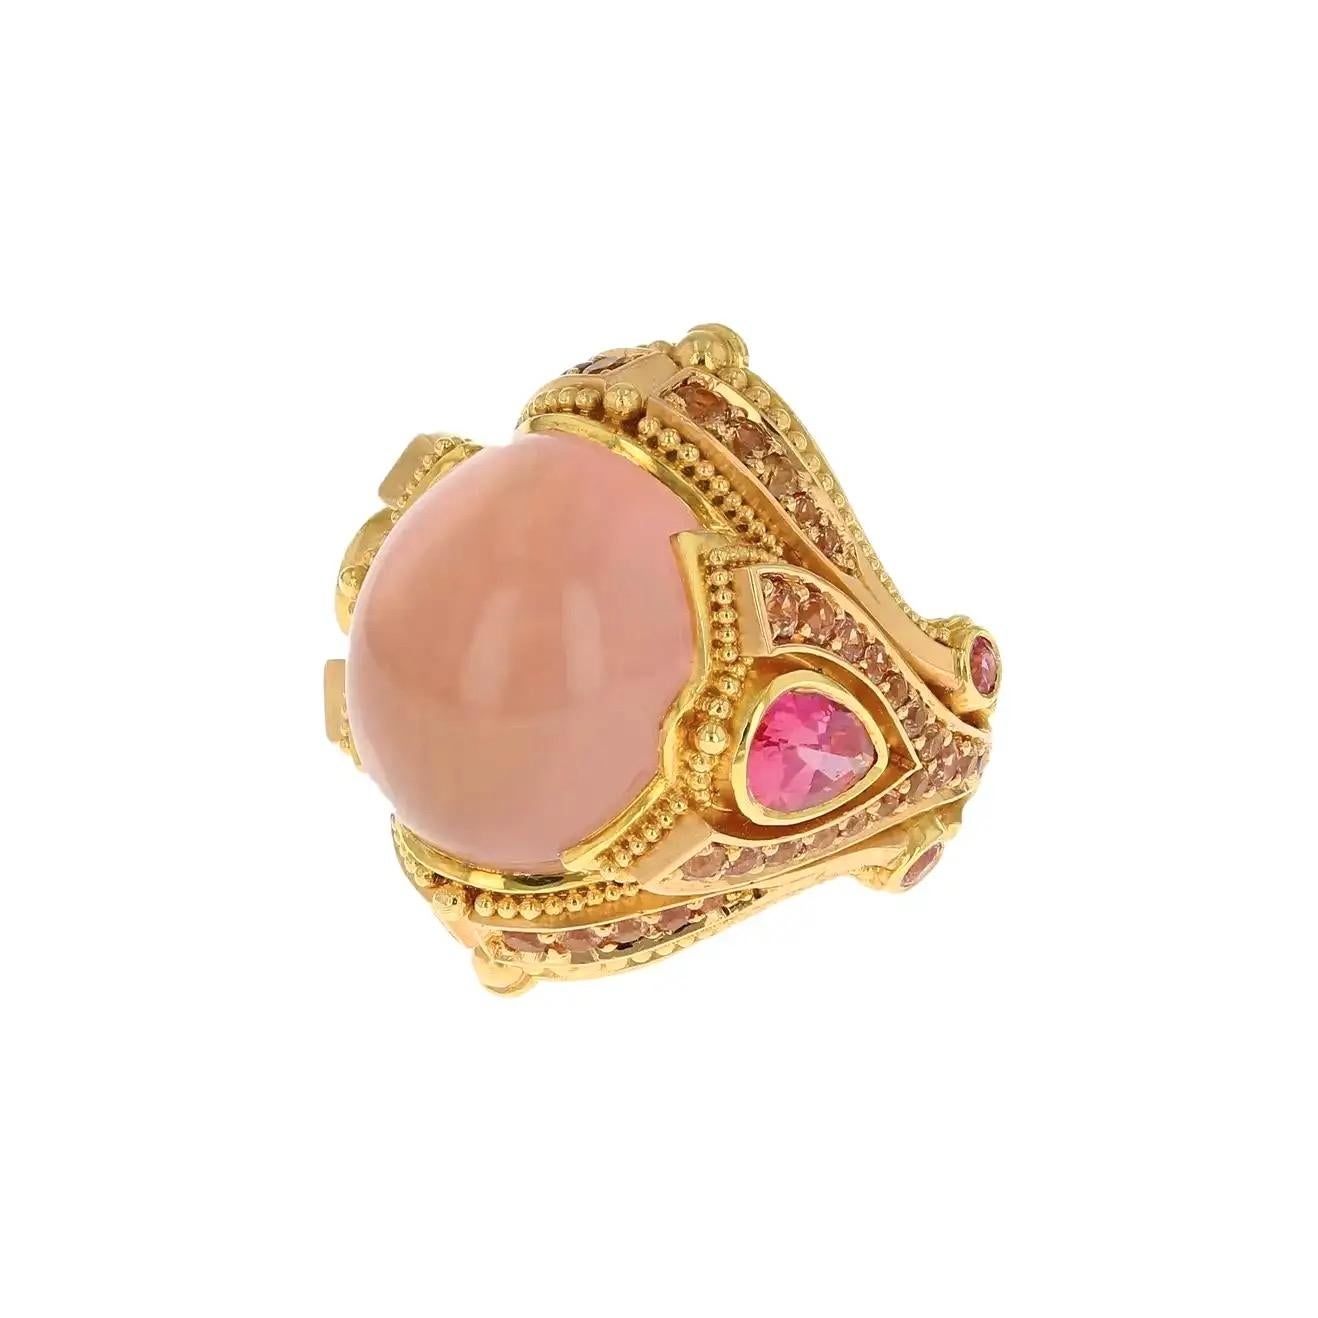 Kent Raible's 'Wish Upon A Star' ring features a 17.78ct Madagascar Star Rose Quartz, 1.55ct Umba River Natural Peach Sapphires and 2.12ct Natural Fuchsia Spinels. 
The main body of the ring was hand fabricated in 18 karat yellow gold, with 18 karat